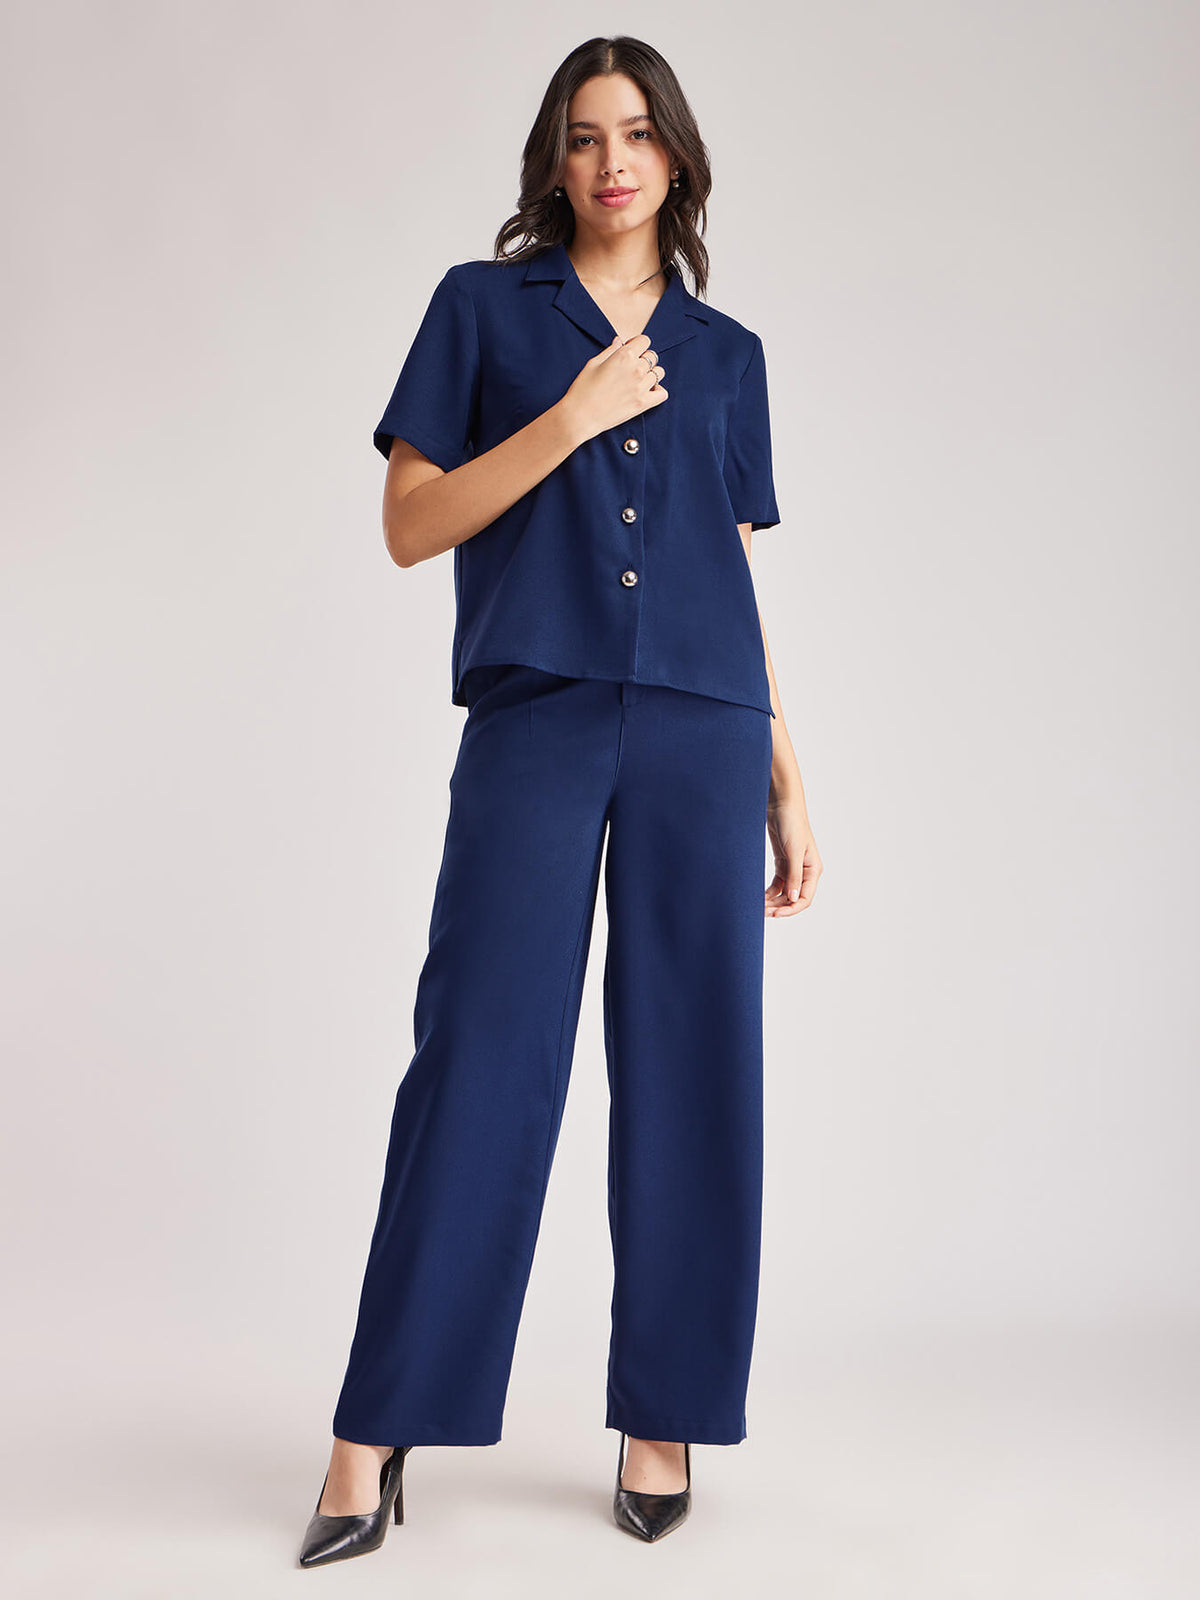 Lapel Collar Shirt And Trouser Coord - Navy Blue